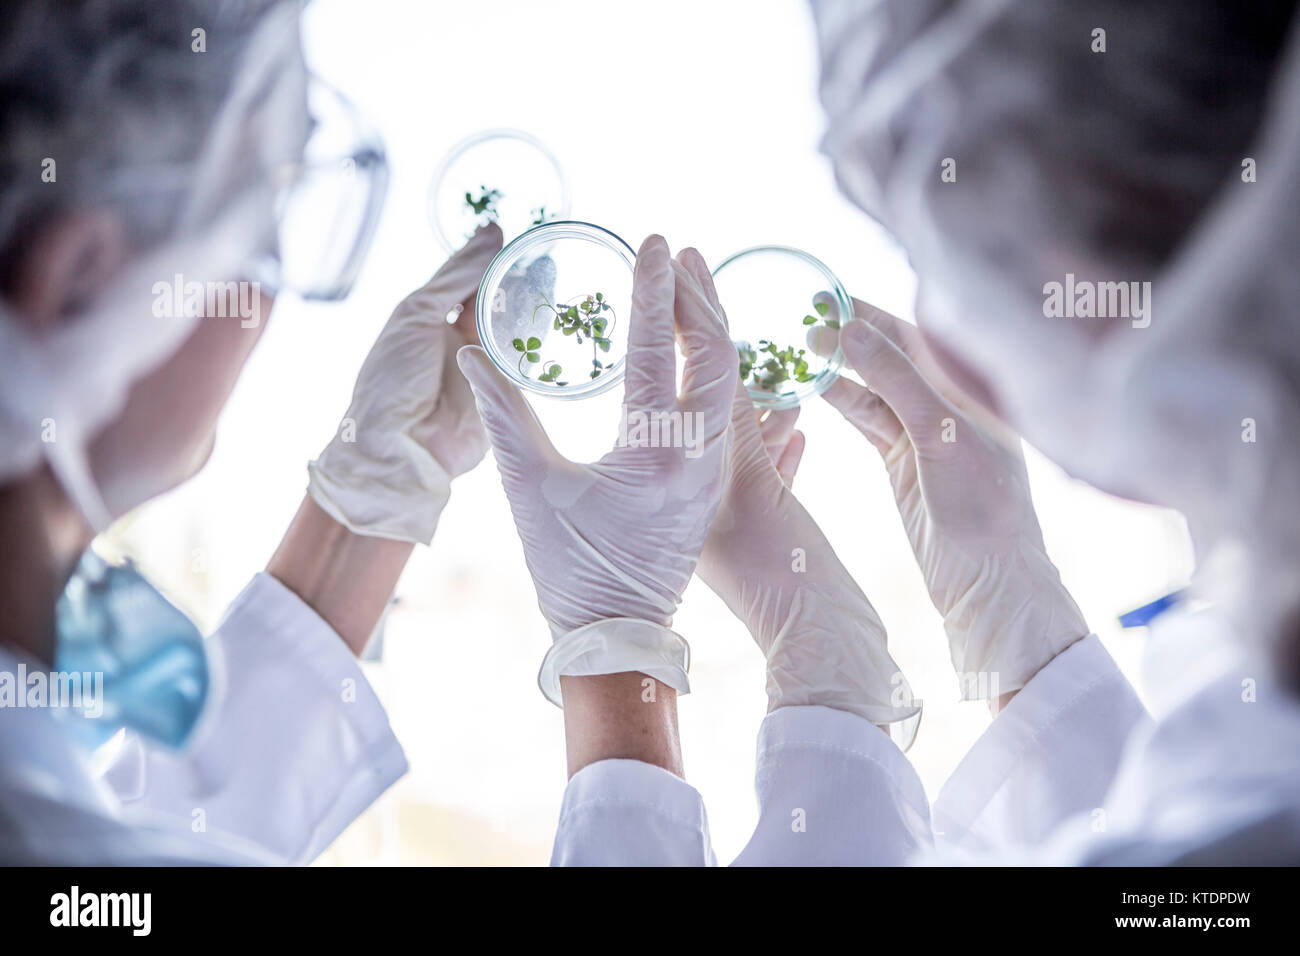 Scientists in lab examining germs in petri dishes Stock Photo